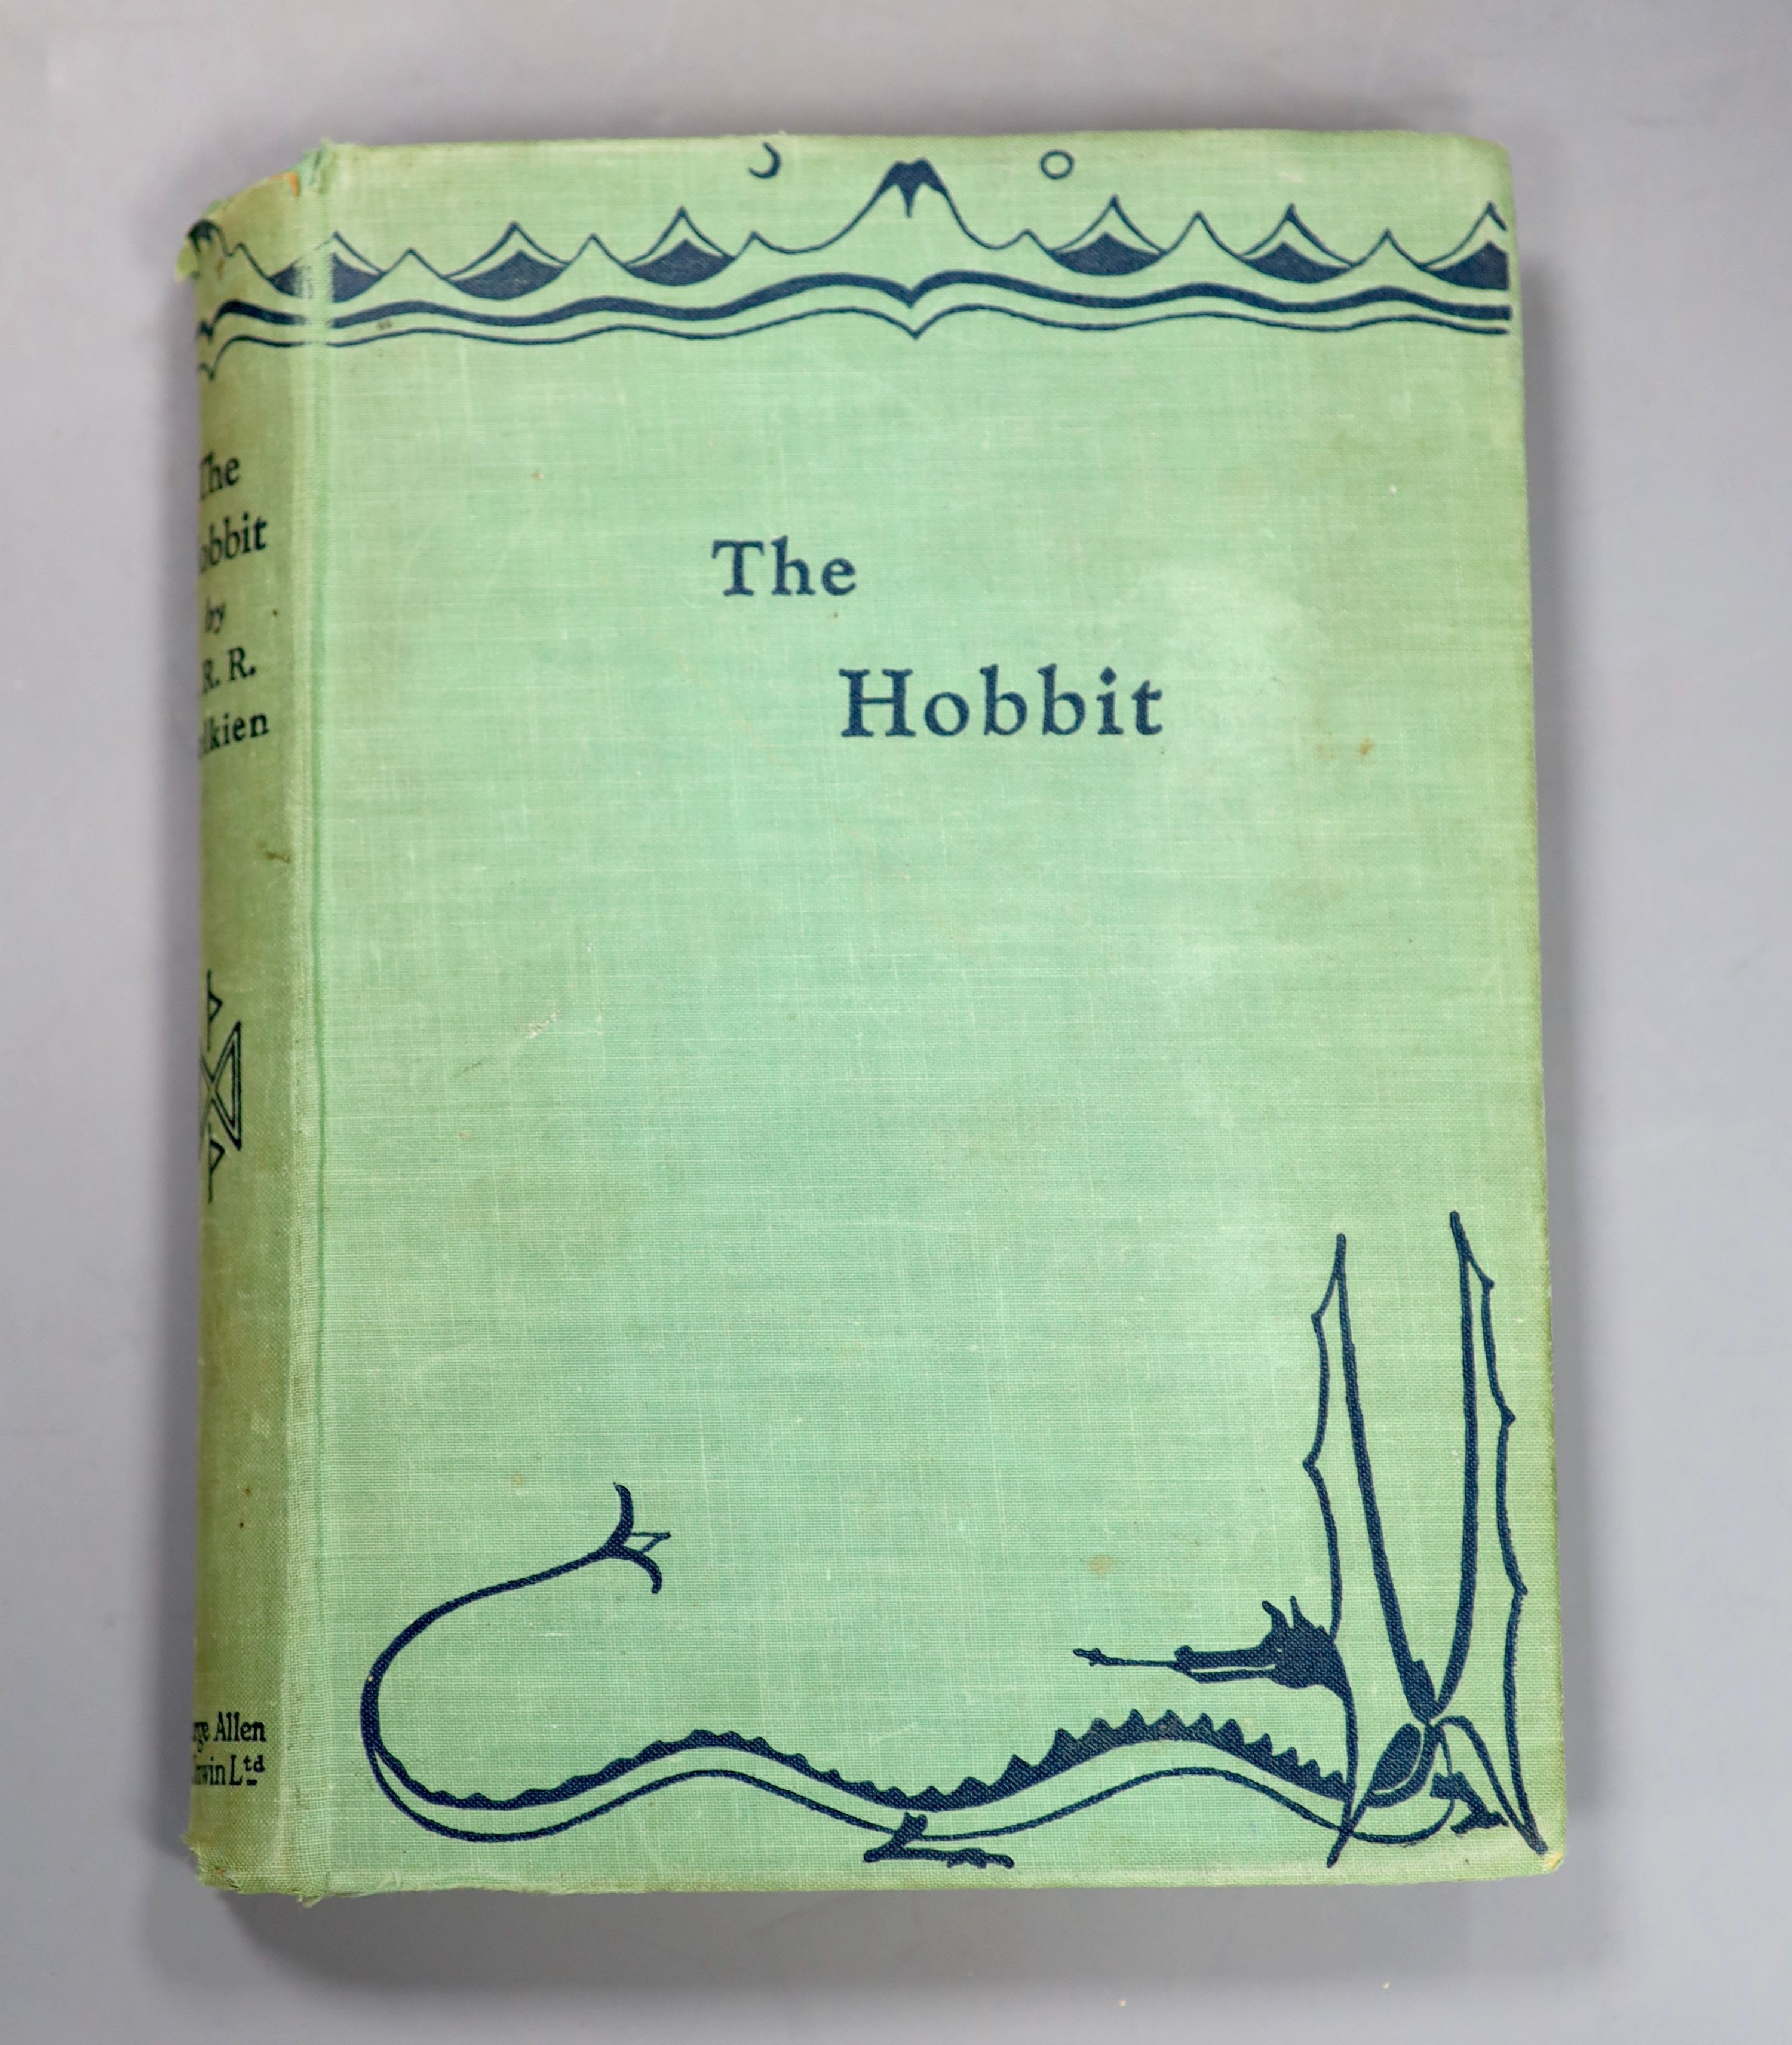 Tolkien, John Ronald Reuel (1892-1973) - The Hobbit or There and Back Again, 1st edition, 1st impression, with 1st impression dust jacket, with the word ‘’Dodgeson’’ hand corrected, with an ink mark through the ‘’e’’, th